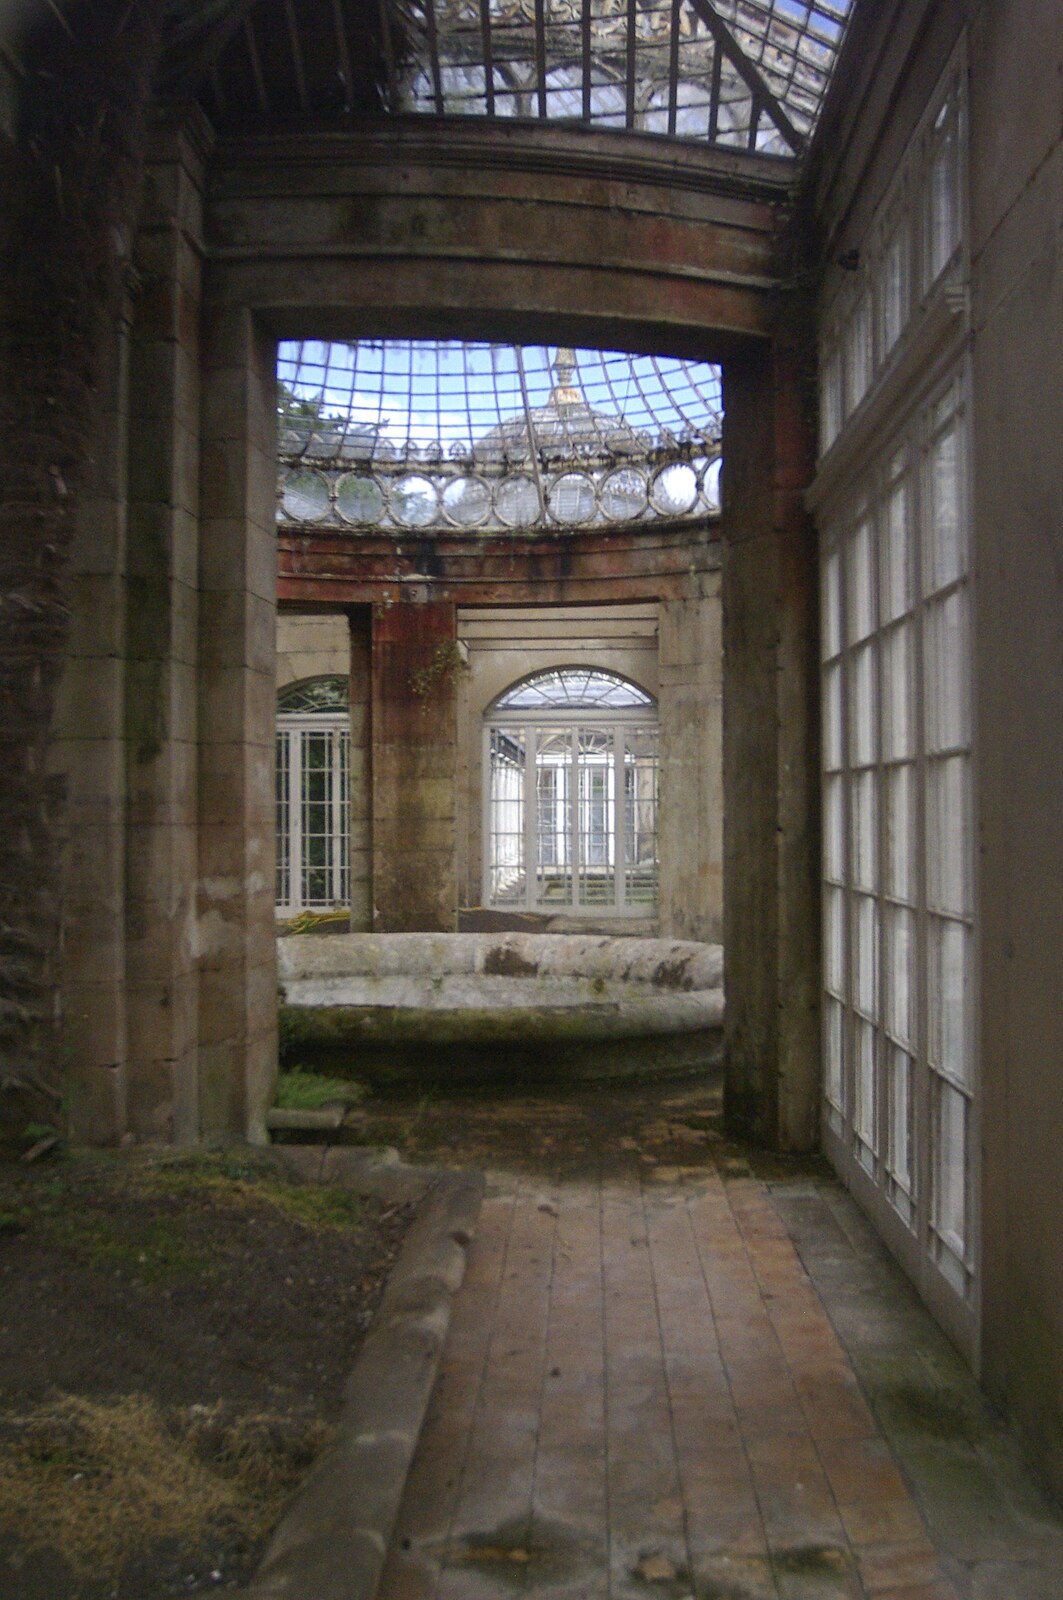 Qualcomm at Alton Towers, Staffordshire - 29th June 2008: The Orangery is sadly getting quite derelict